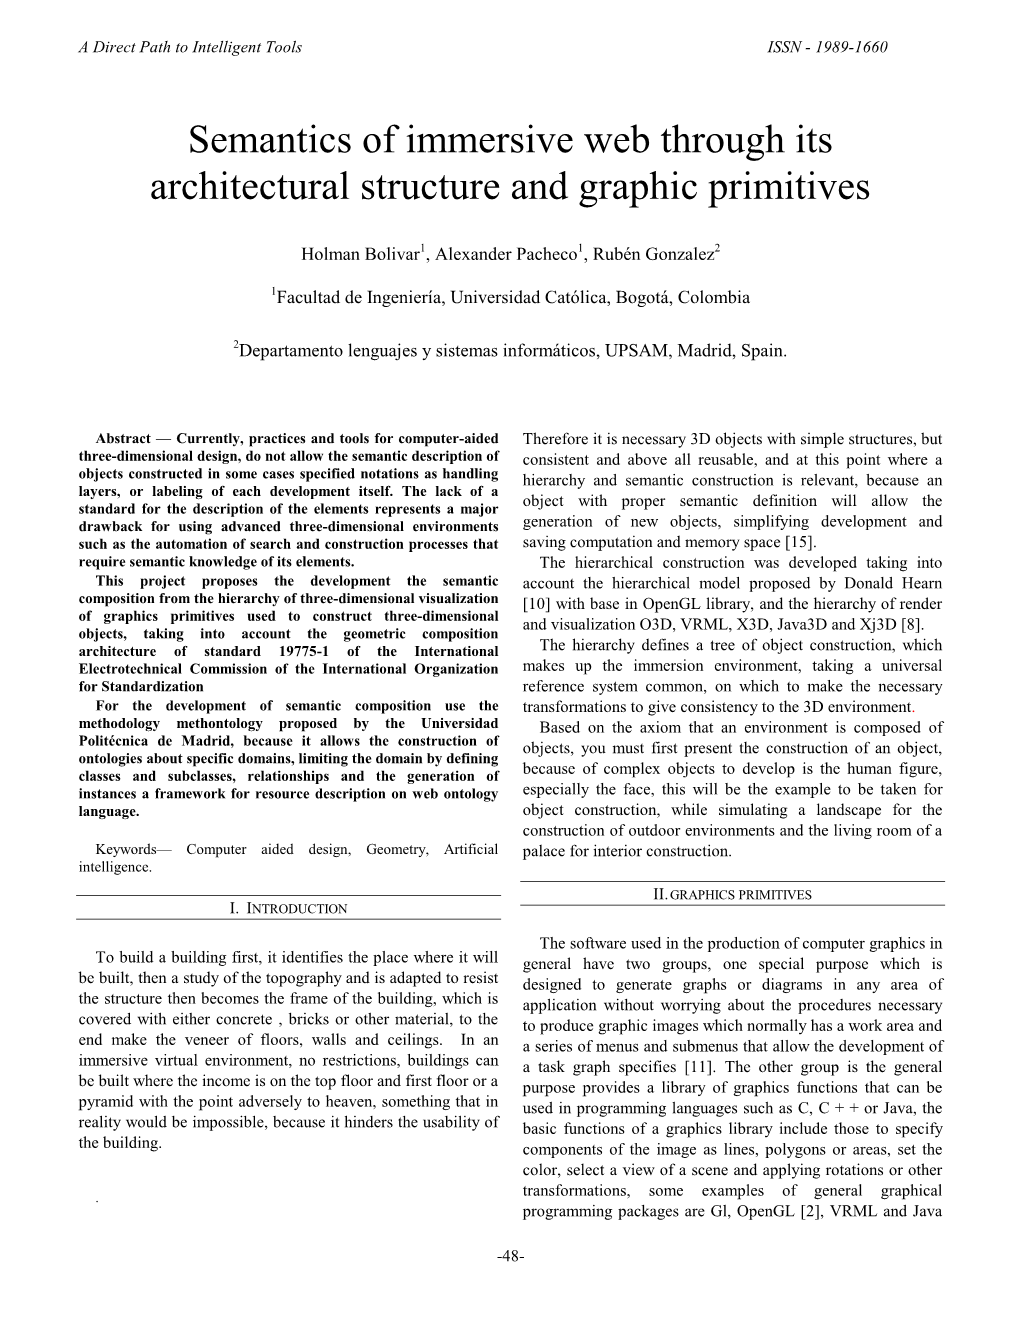 Semantics of Immersive Web Through Its Architectural Structure and Graphic Primitives